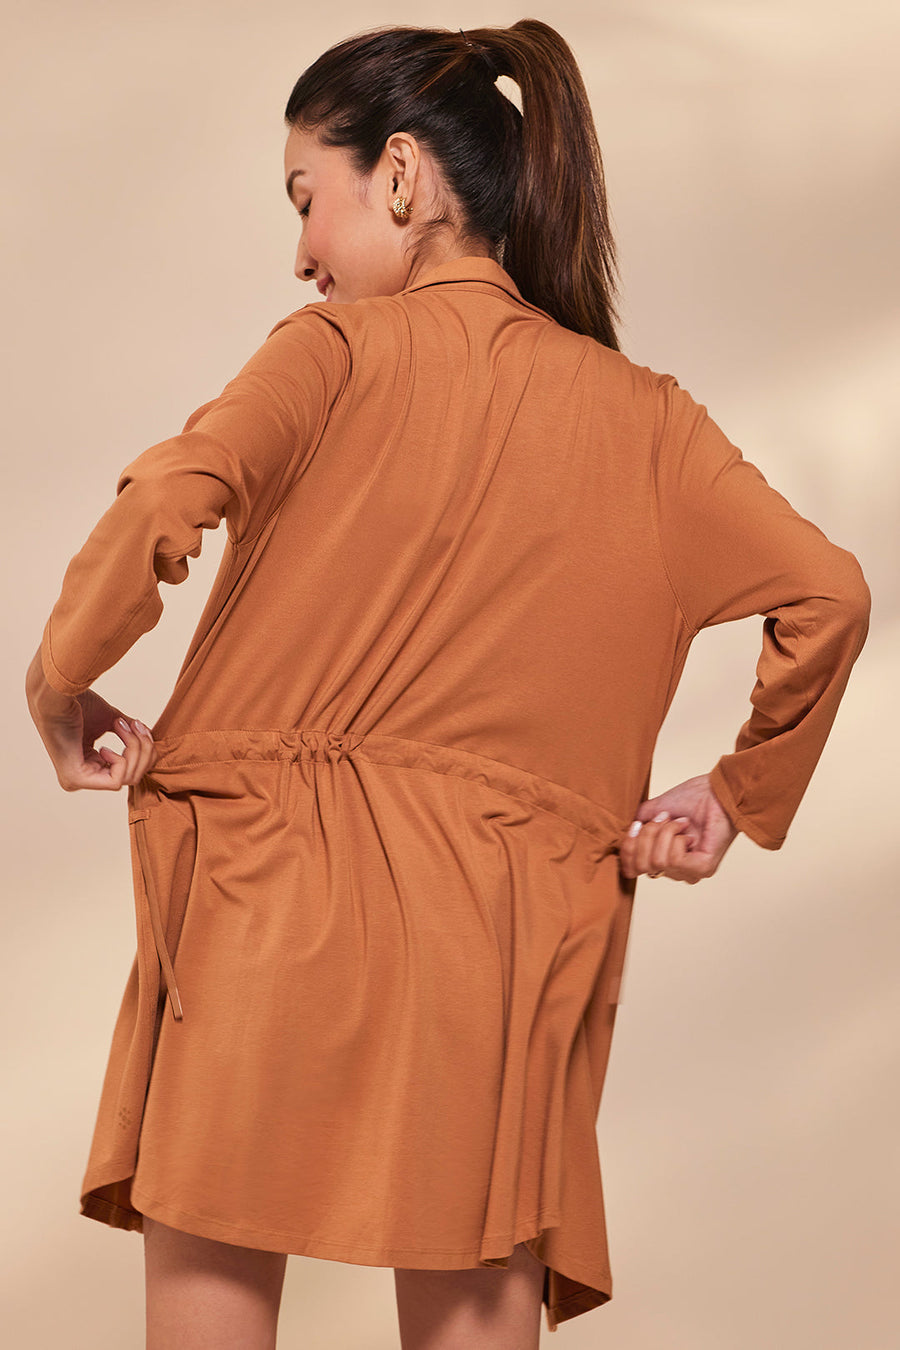 Go With The Flow Top Brown - Sensing